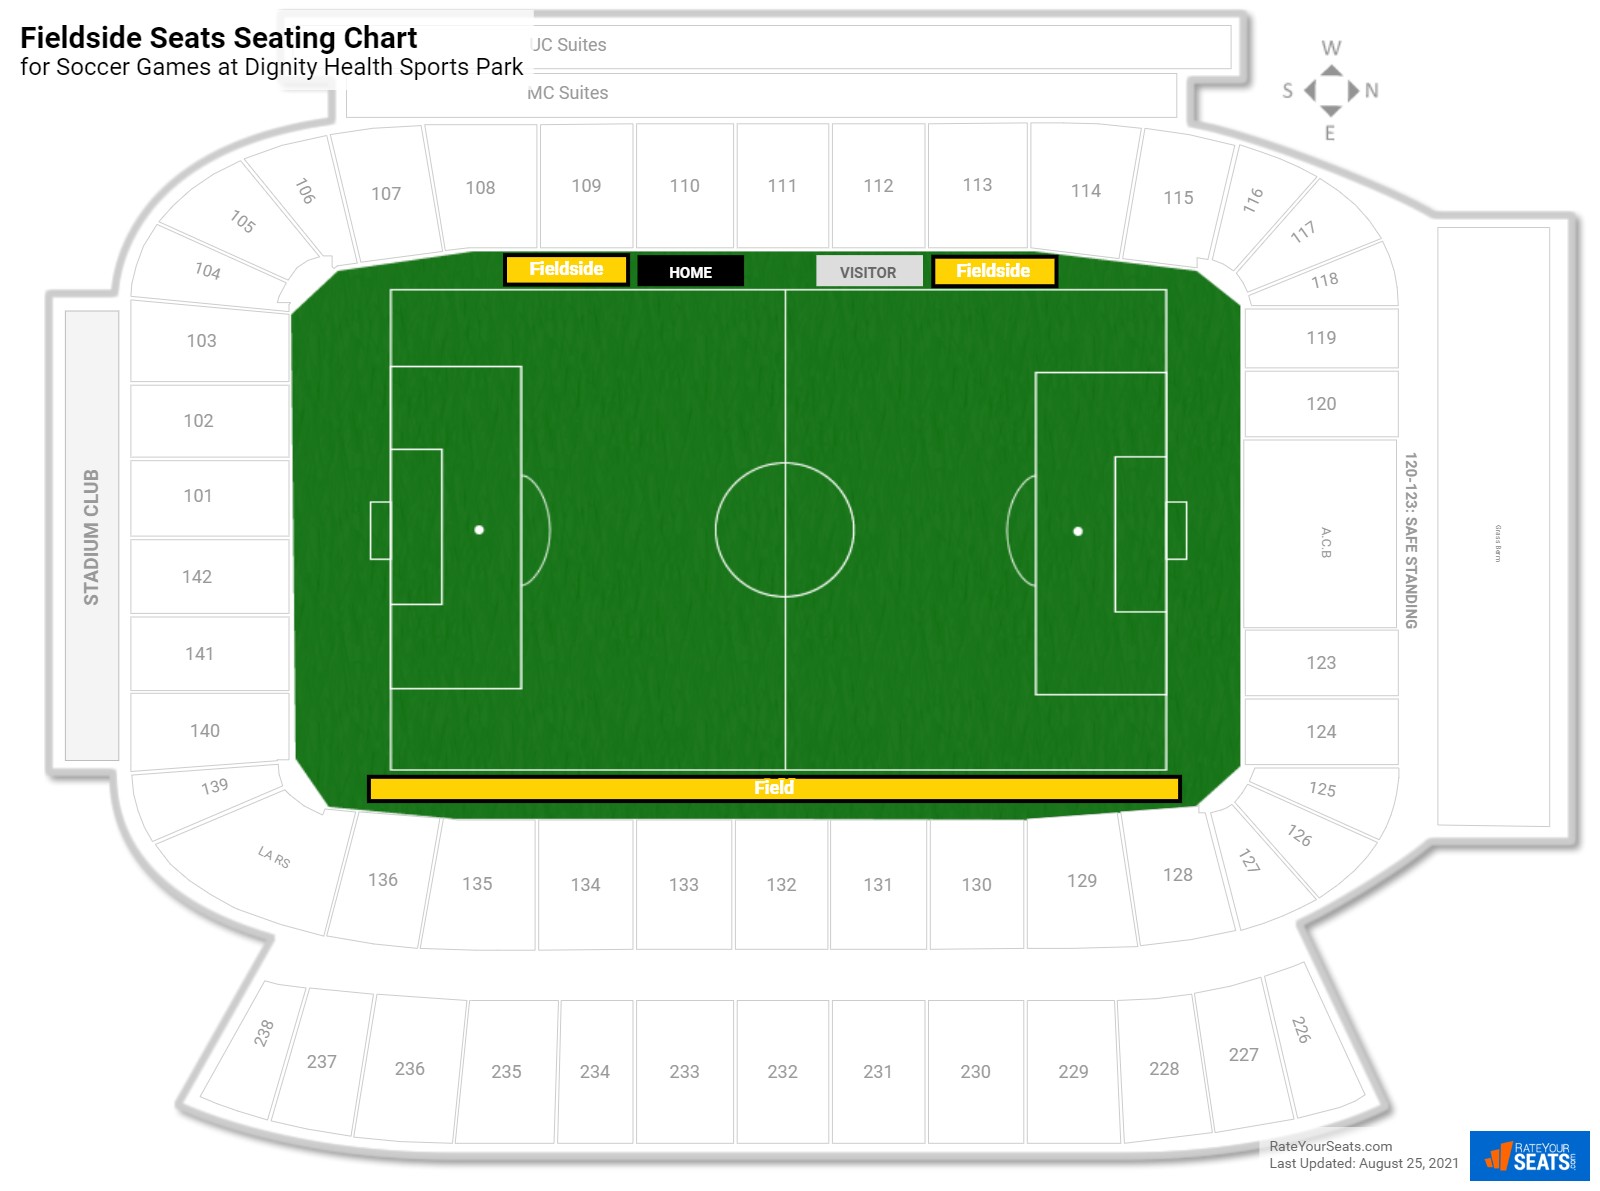 Soccer Fieldside Seats Seating Chart at Dignity Health Sports Park